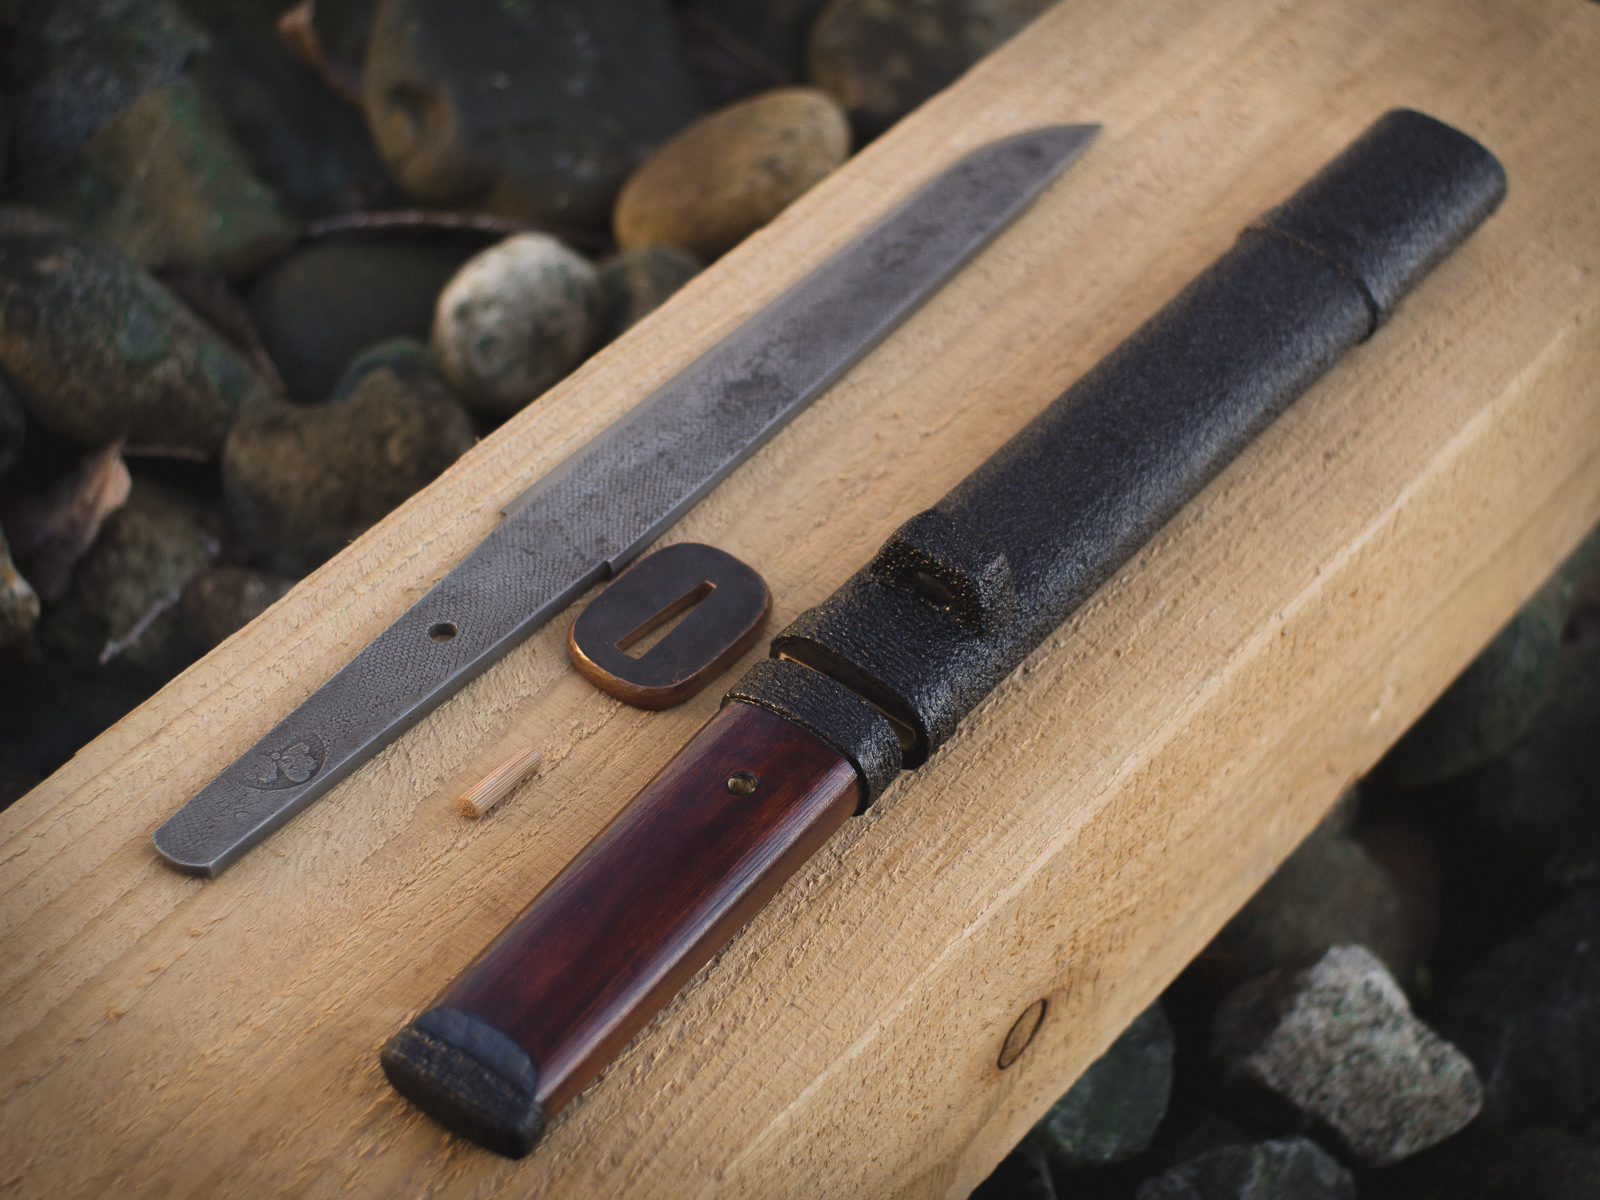 Island Blacksmith: Charcoal forged knives from reclaimed materials.